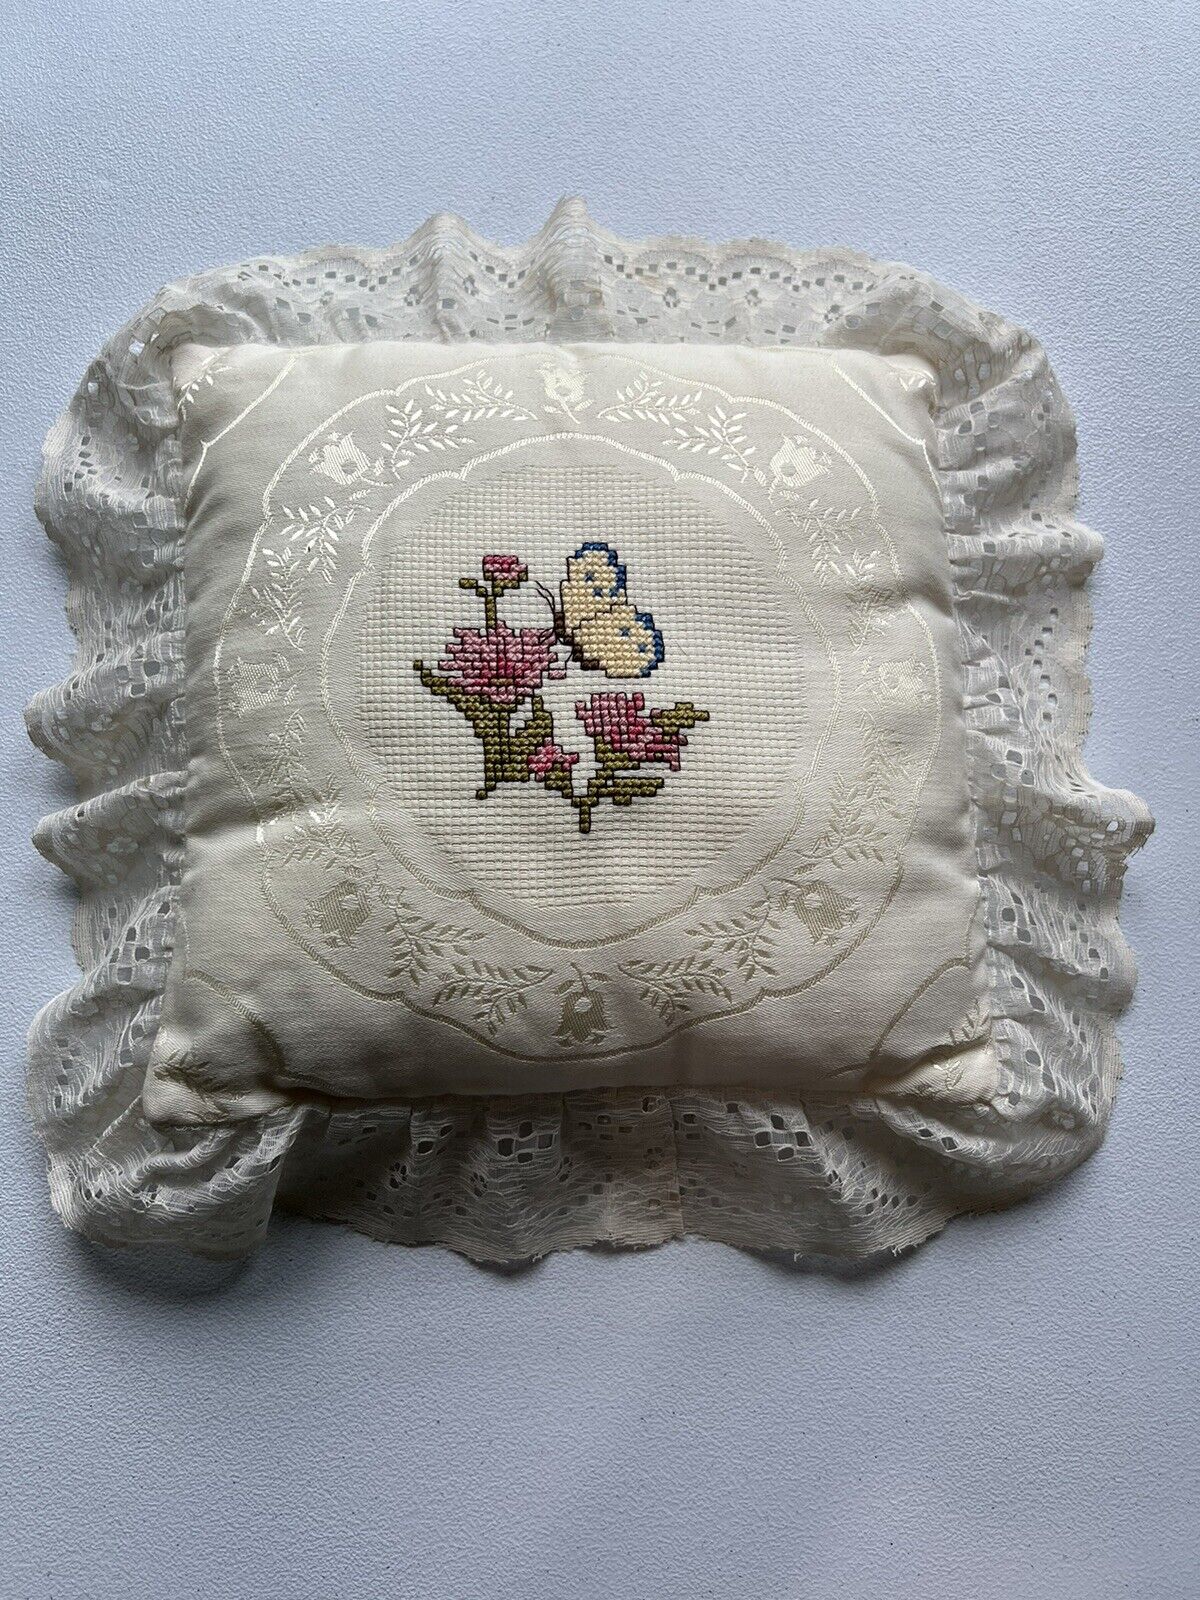 Vintage Small Pillow Hand Embroidered Butterfly Floral Lace Cottage